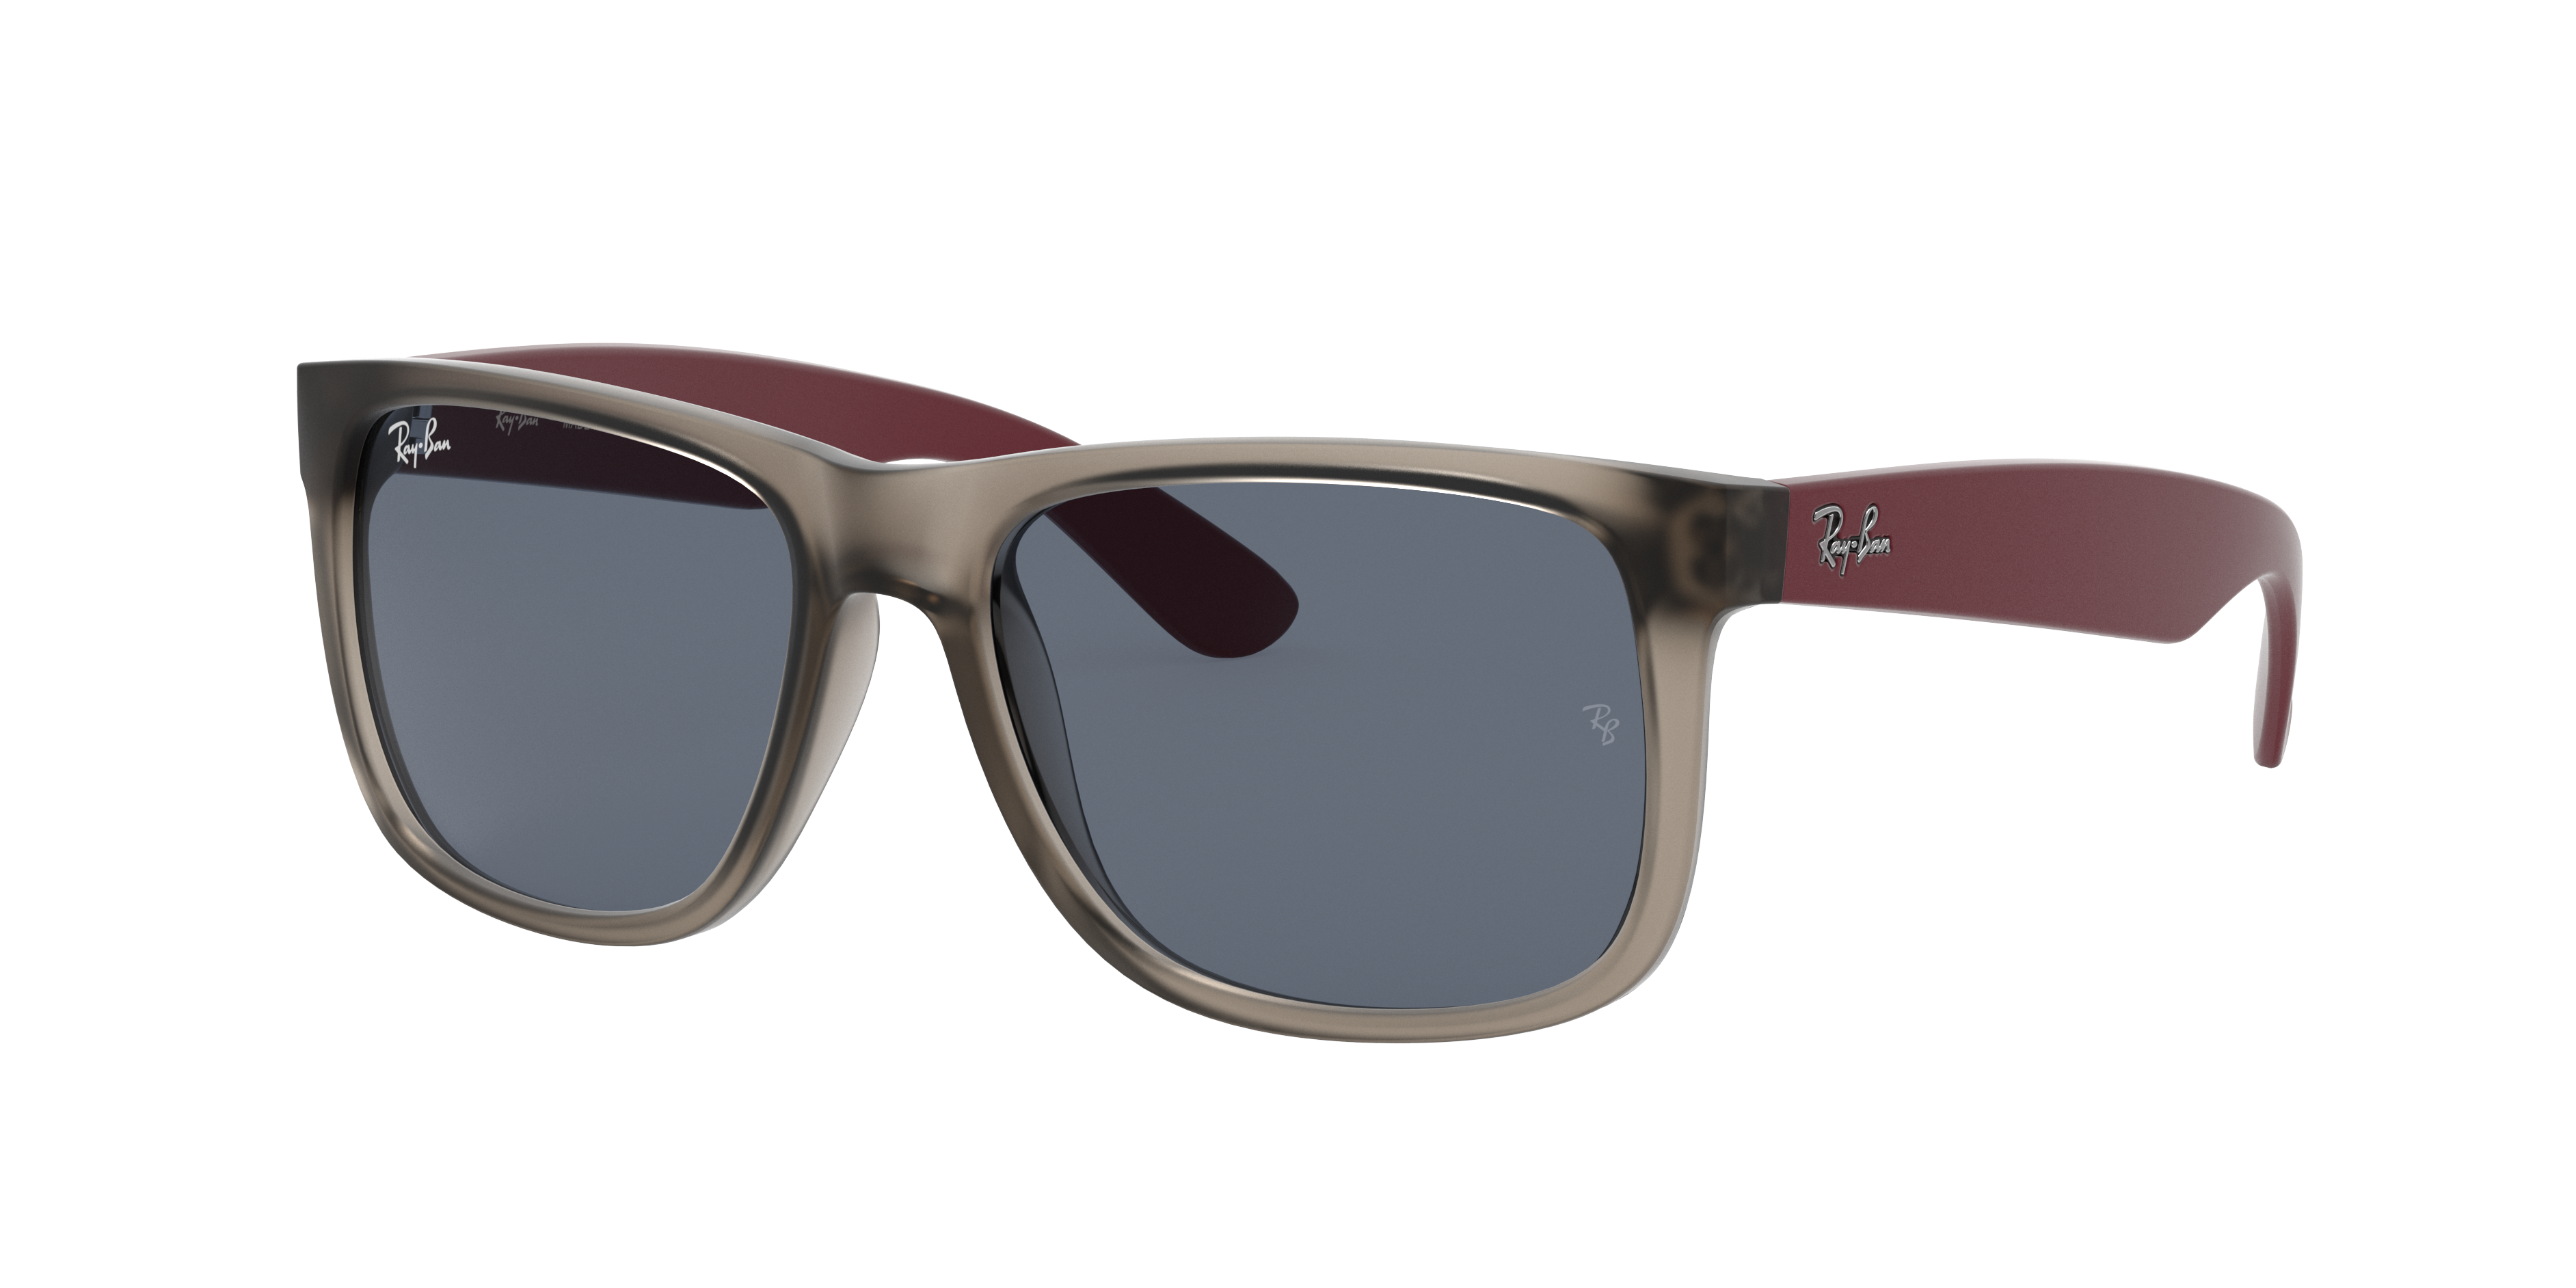 ray ban rb4165 justin sunglasses rubber grey with grey transpare